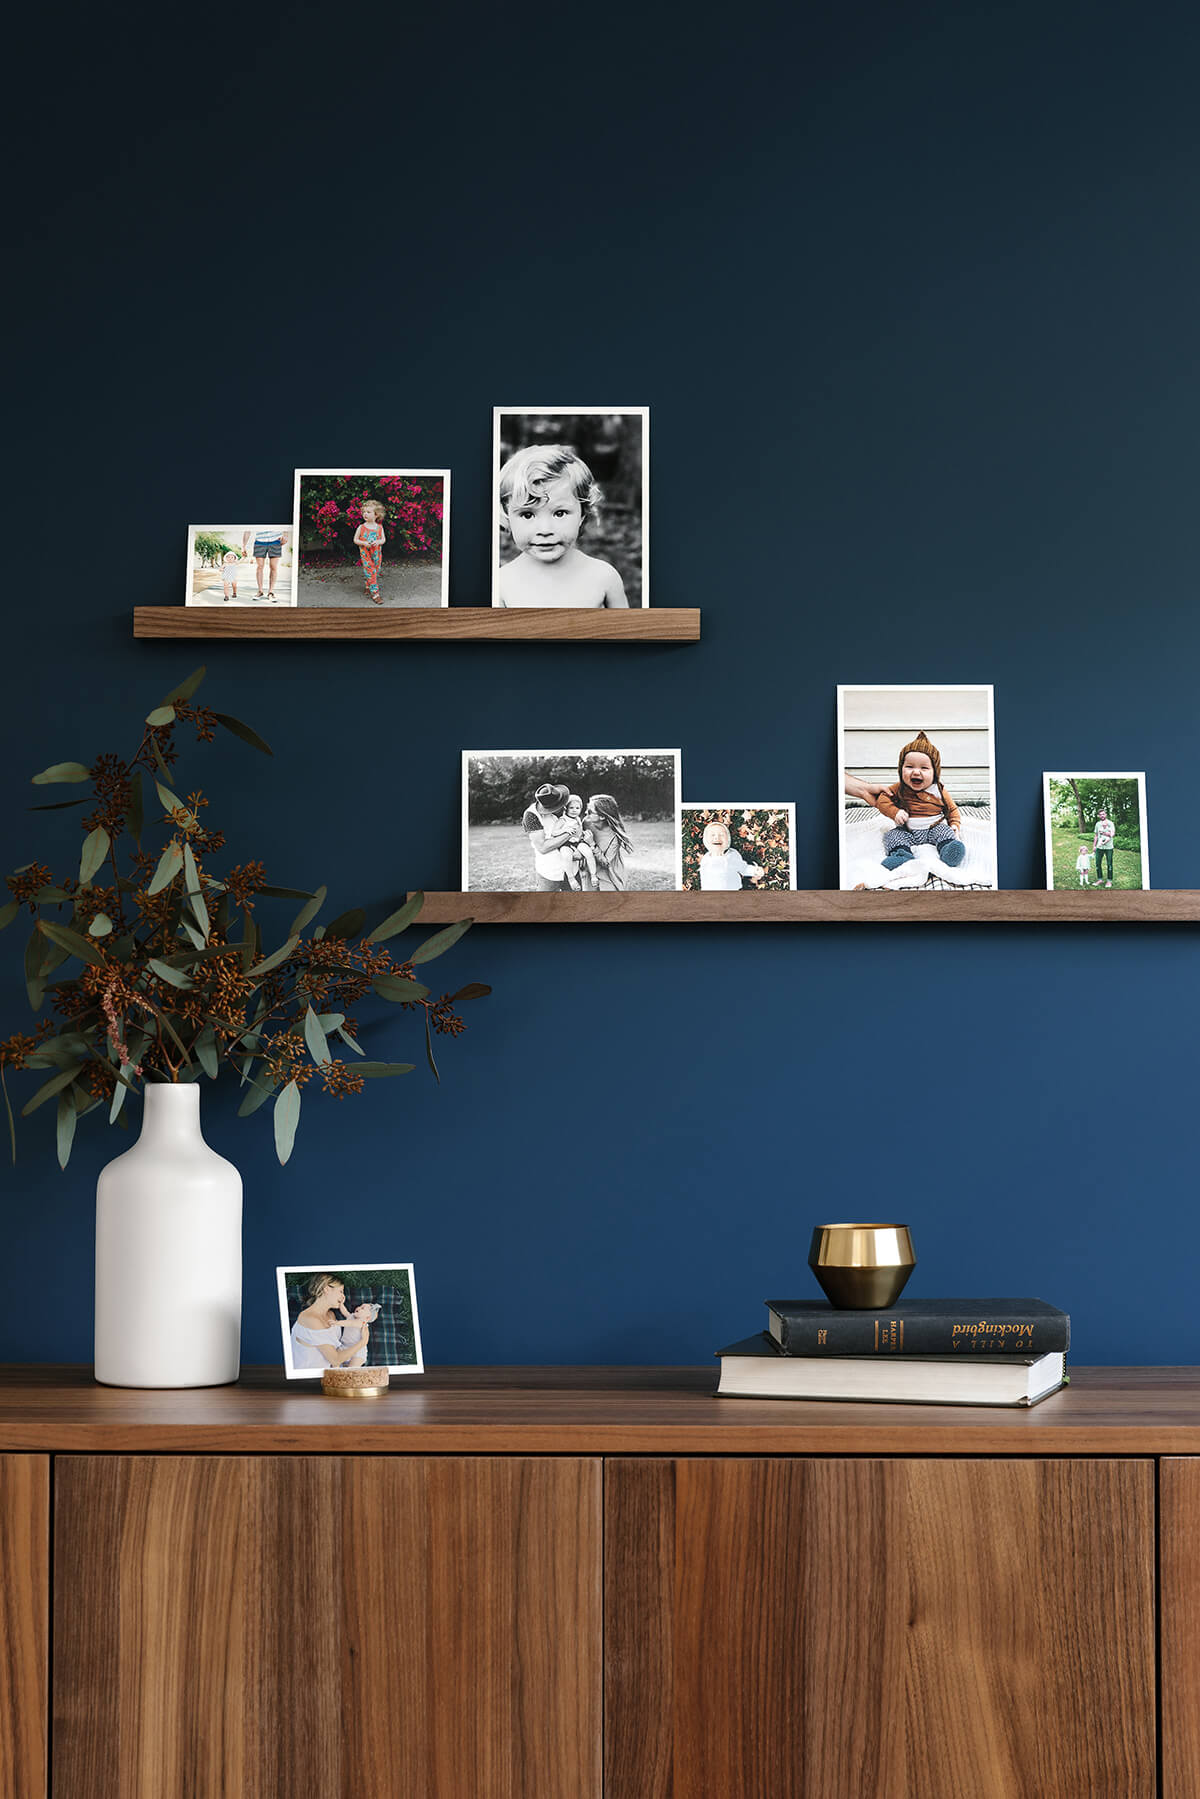 Photo prints of children on display on two floating shelves attached to a dark blue wall